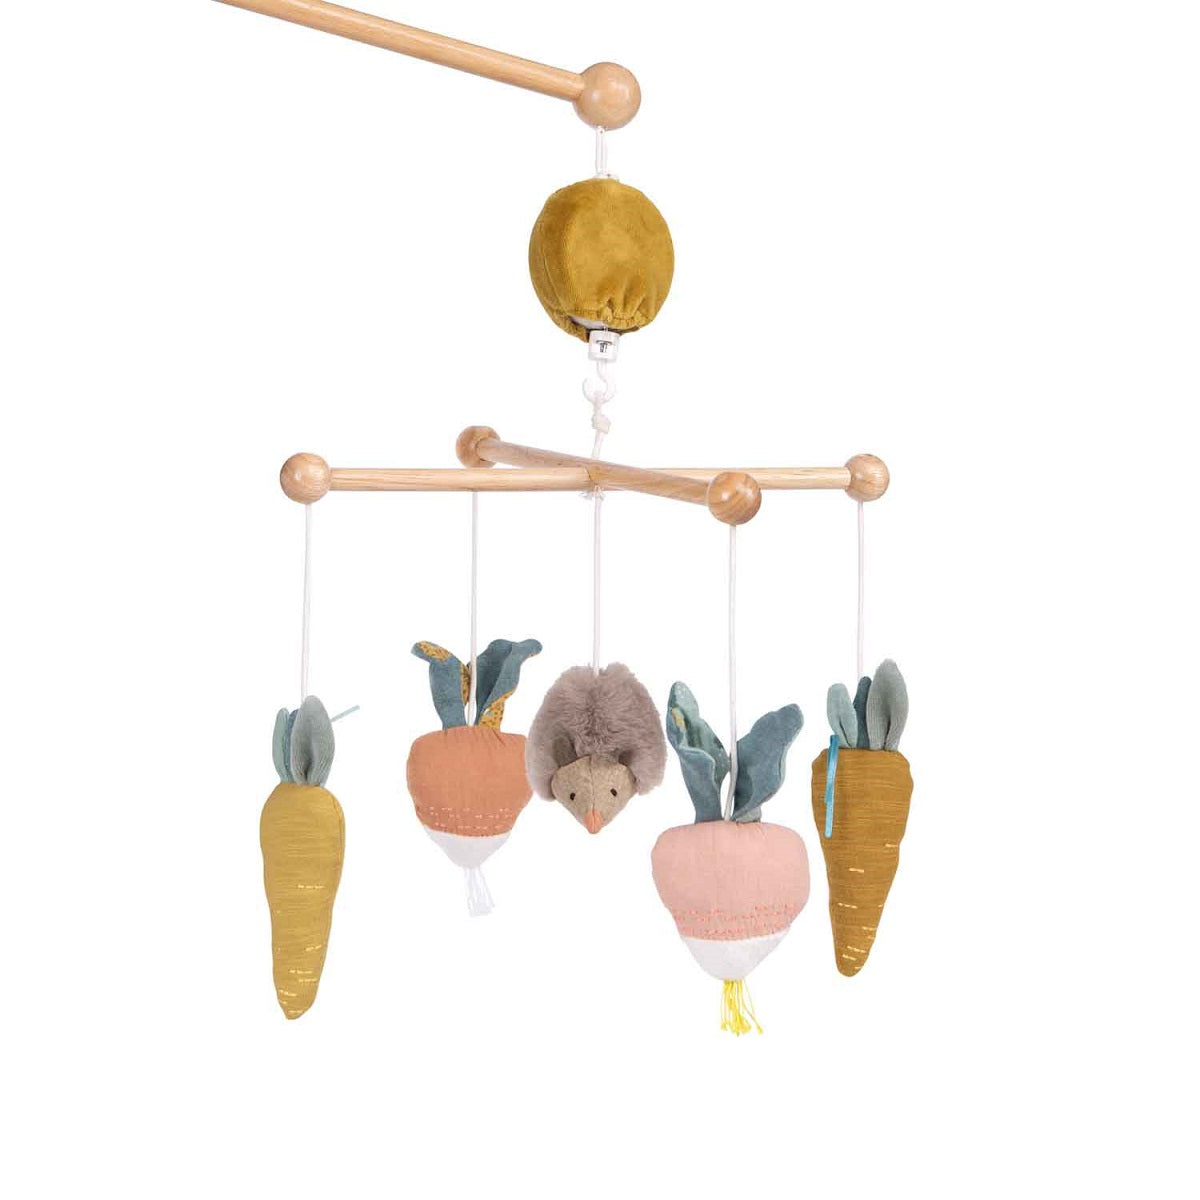 Trois Petits Lapins - Musical Mobile